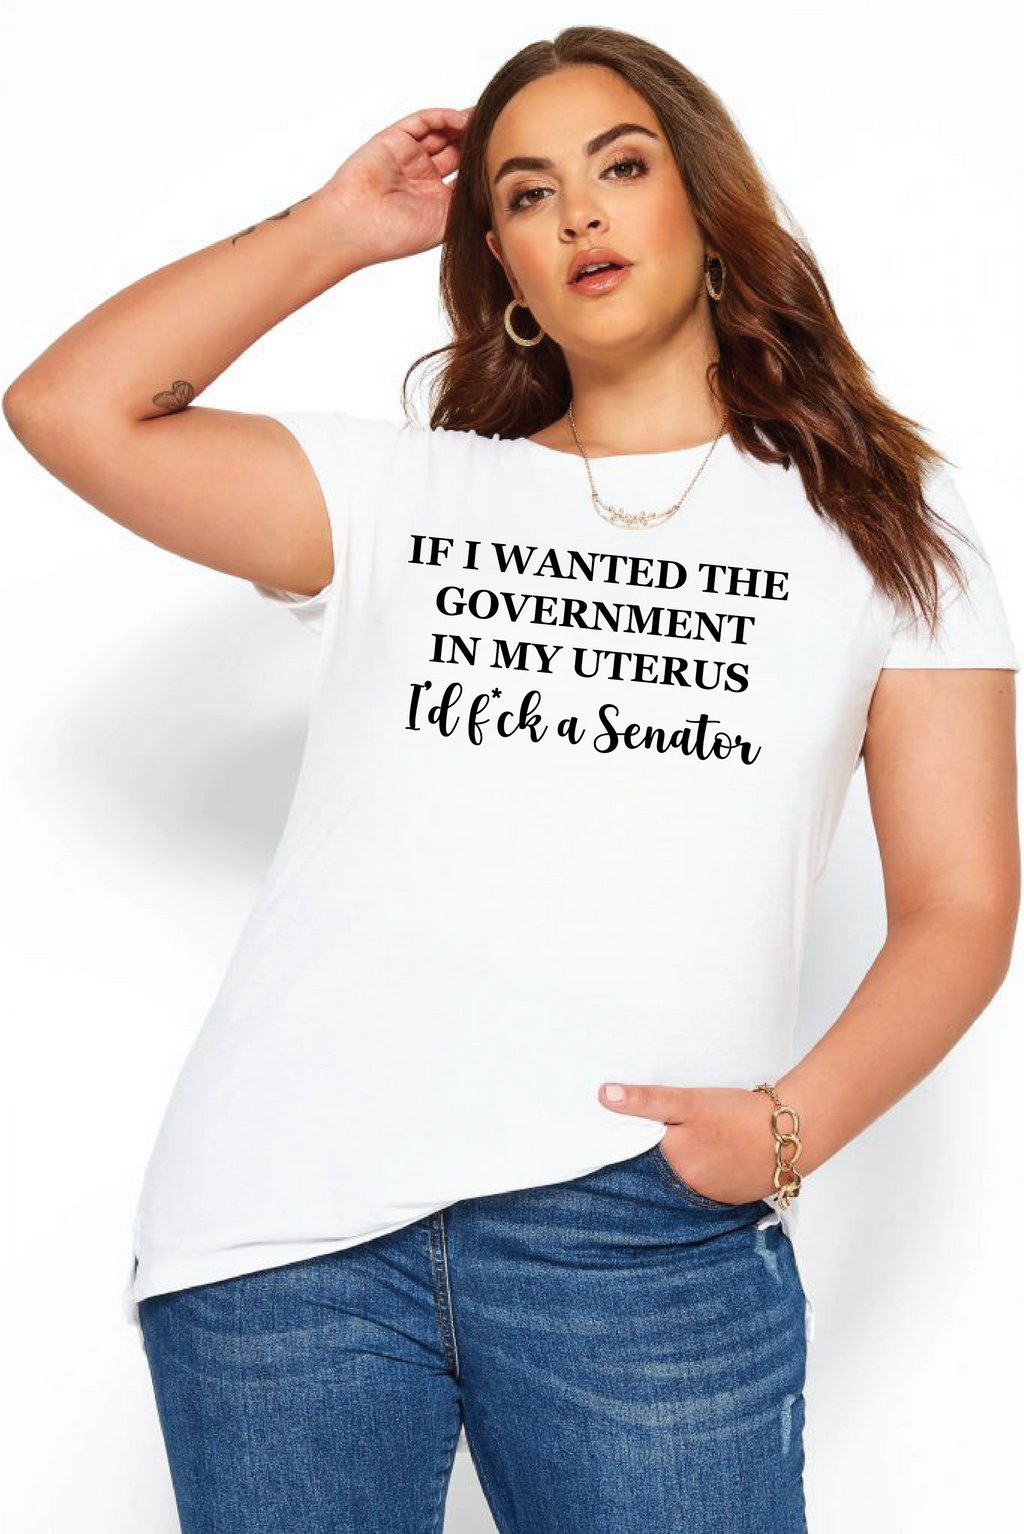 If I Wanted the Government in My Uterus I'd f*ck a Senator